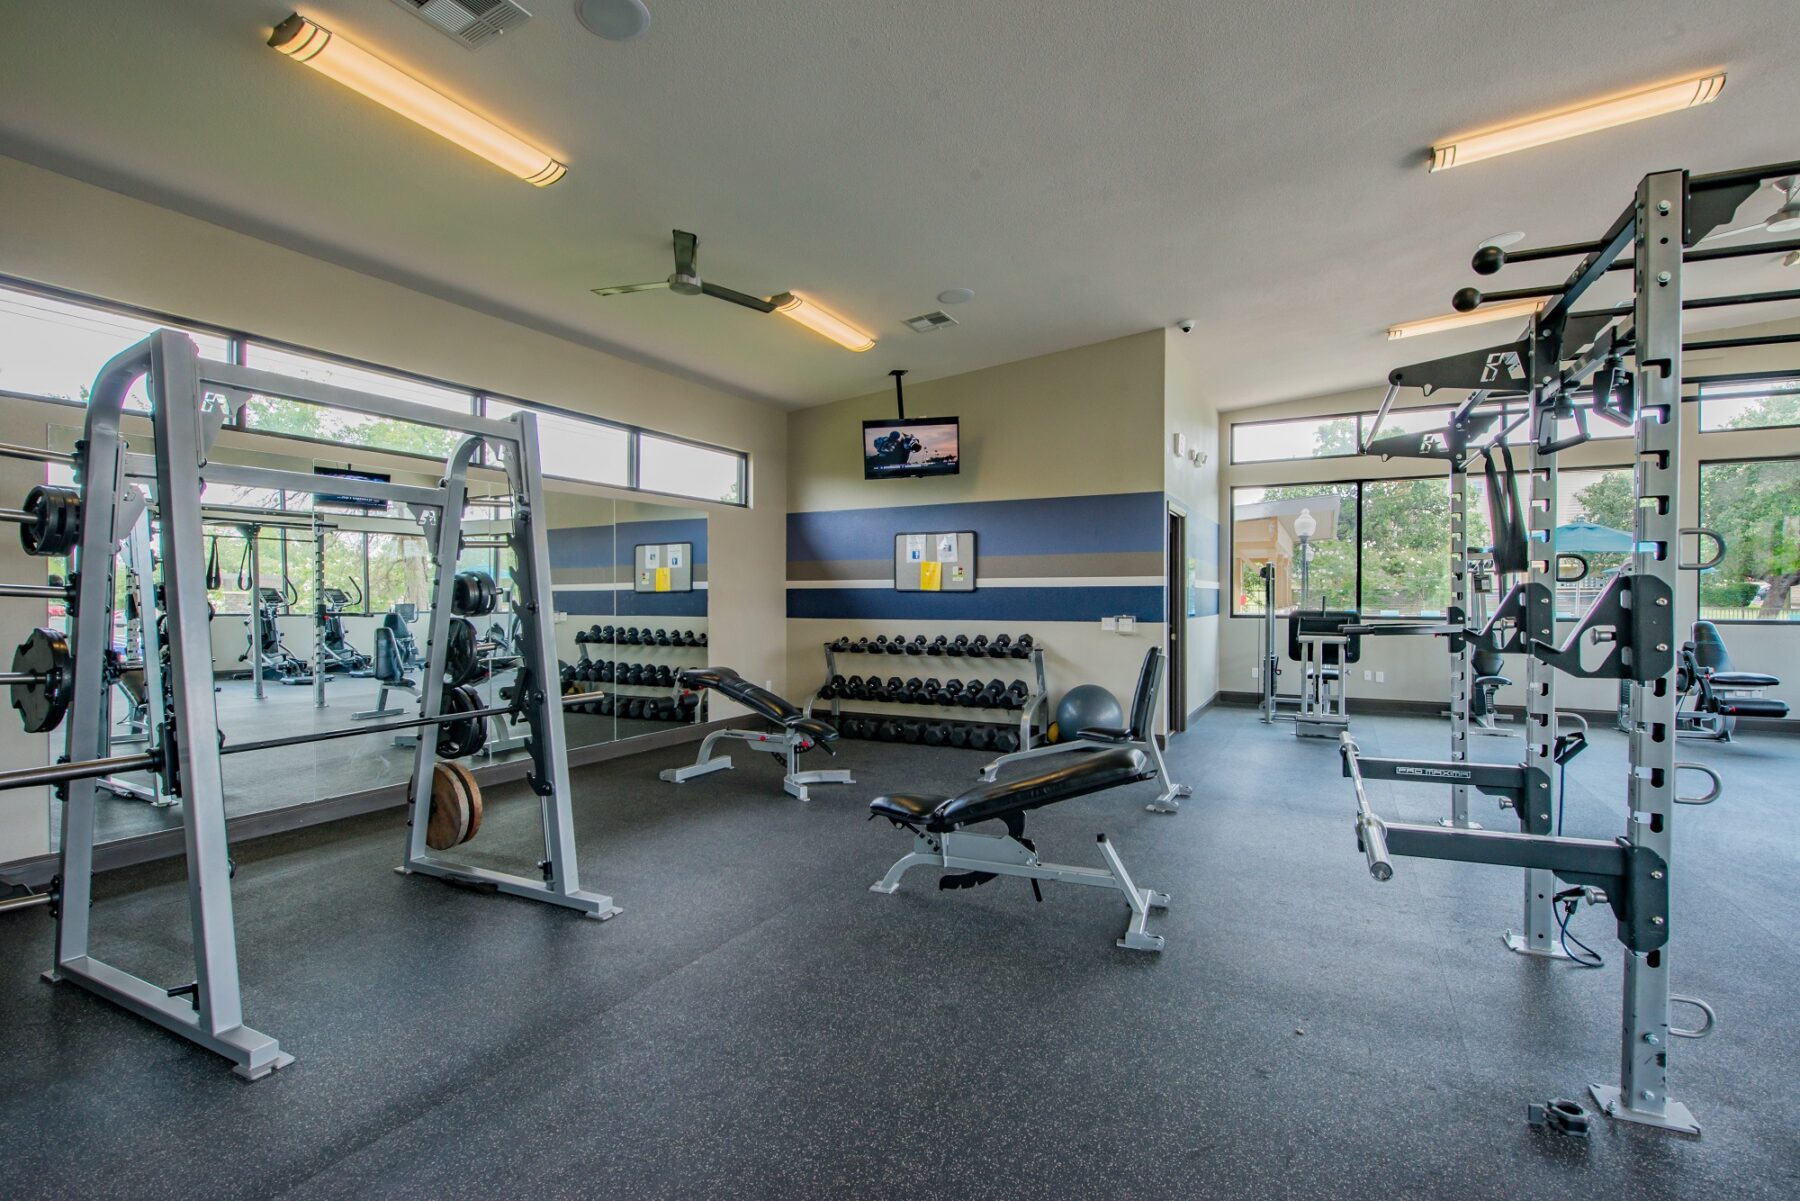 Large fitness studio with ceiling fan, tv, and lots of equipment of many types